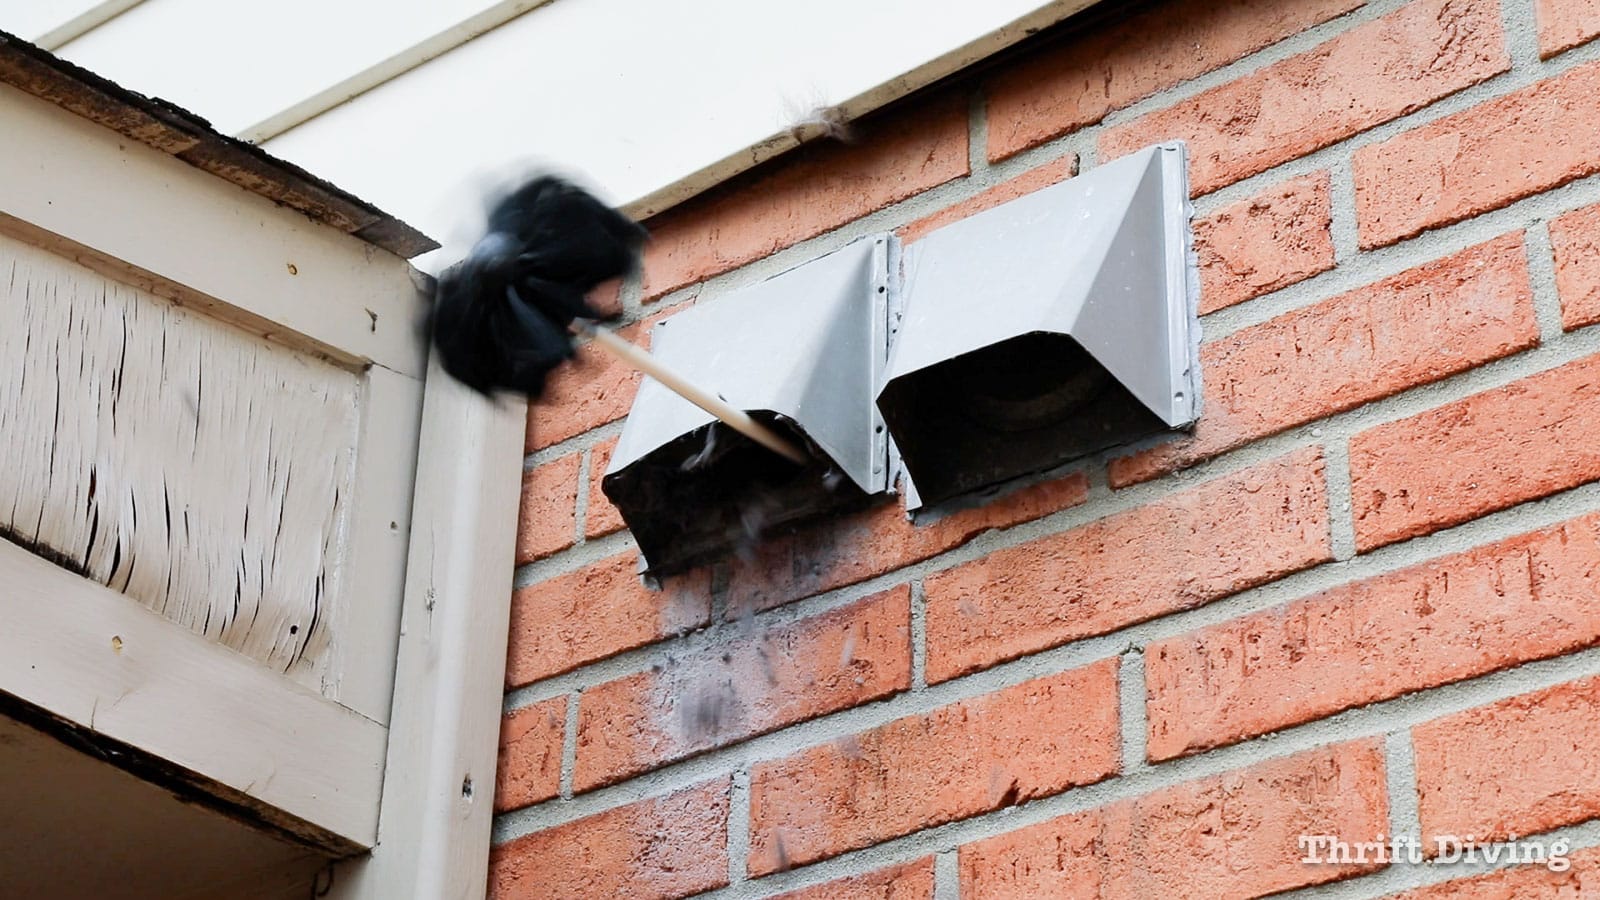 Cleaning the exterior dryer vent. - 7 Home Maintenance Tasks - Thrift Diving